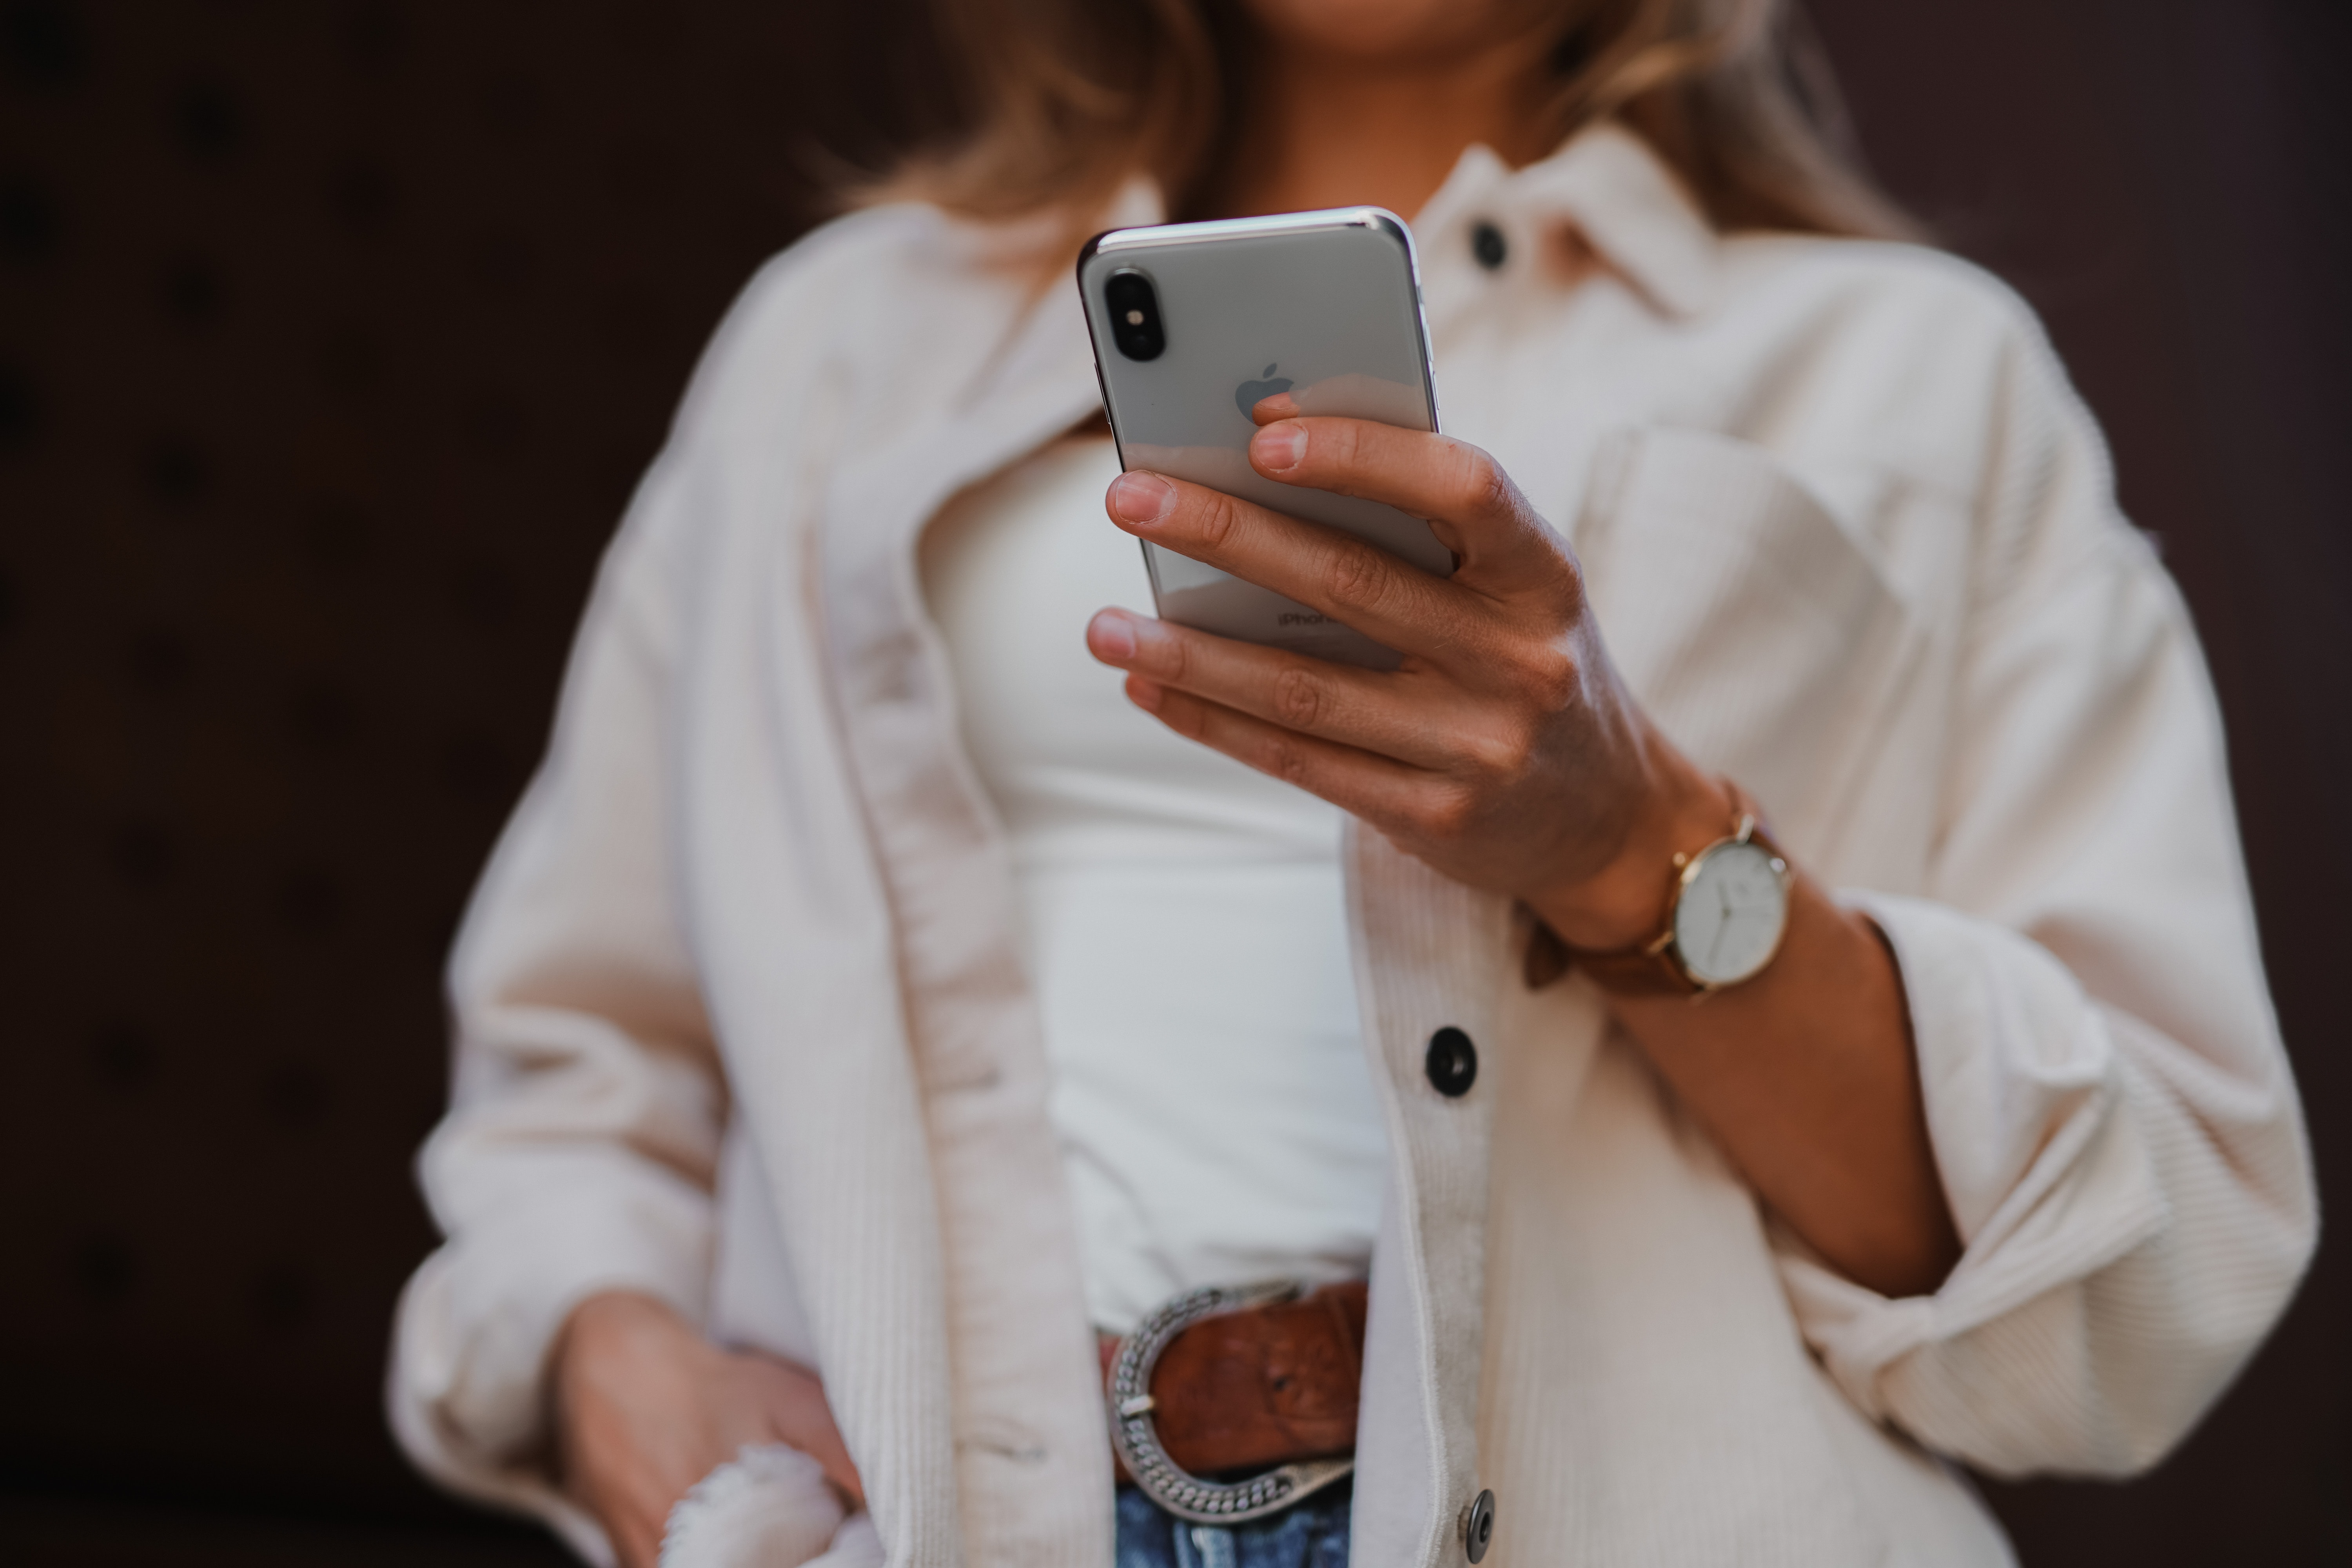 Image of lady in white shirt holding a mobile phone using an app